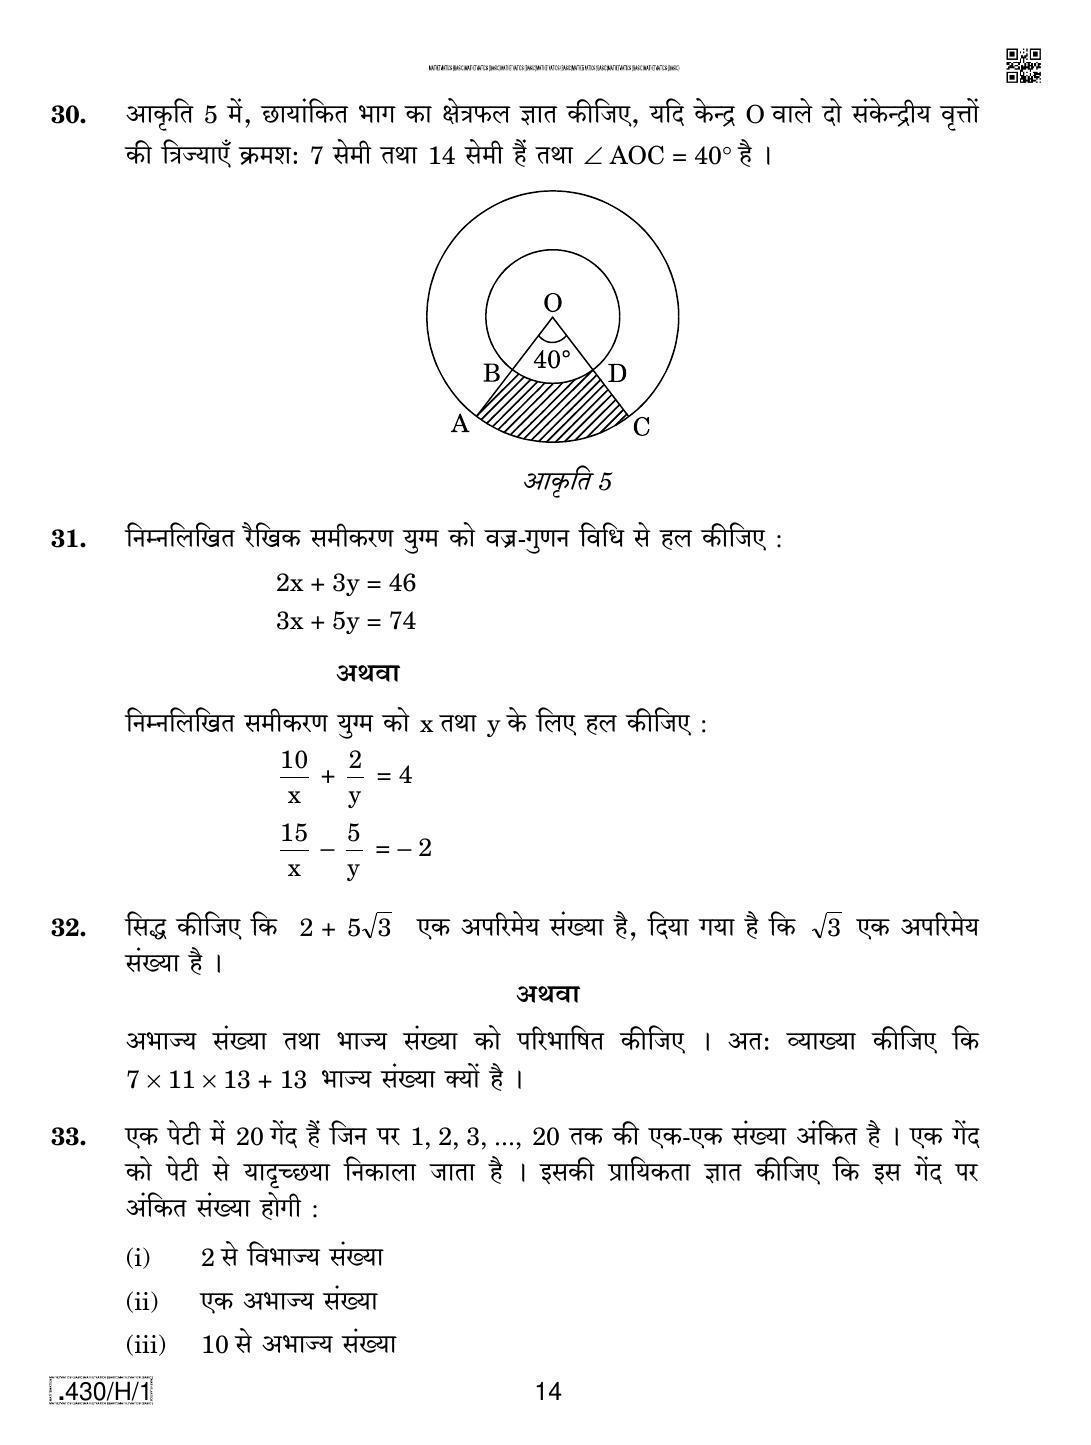 CBSE Class 10 430-C-1 - Maths (Basic) 2020 Compartment Question Paper - Page 14